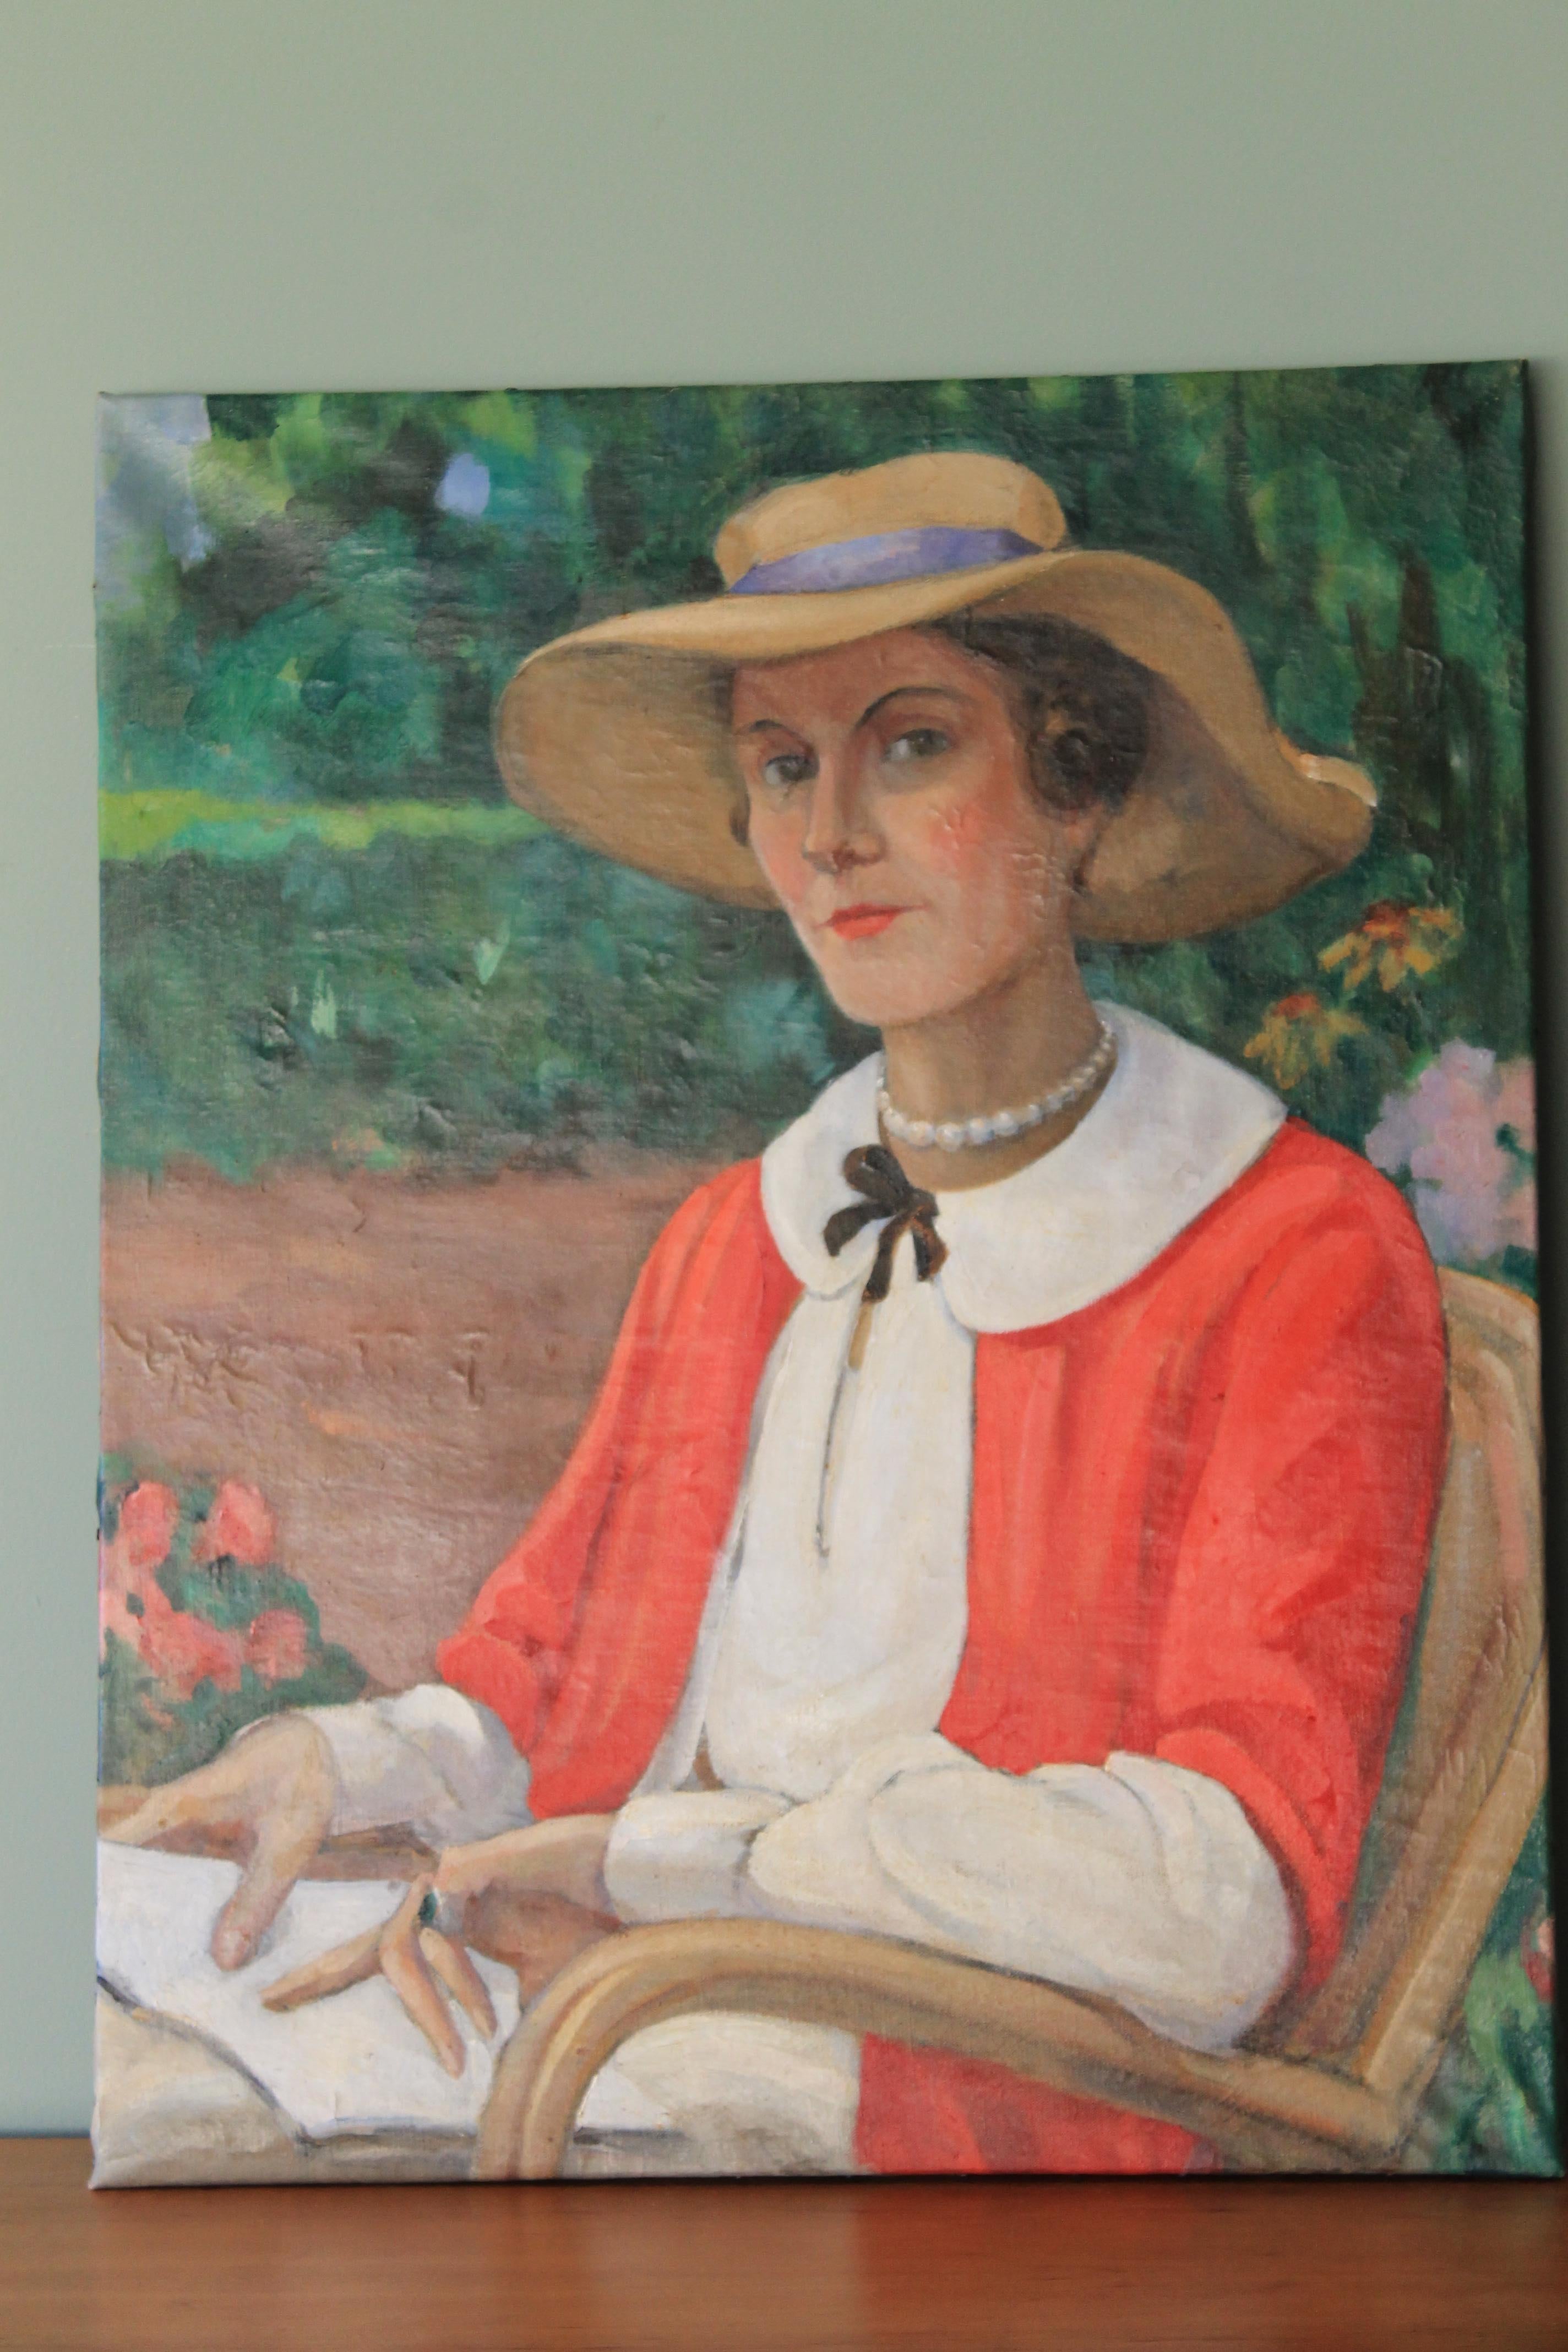 Large vintage portrait of a woman, oil painting by Louise Alix of a woman in a hat in a garden setting. 
An unusual and striking bright portrait of a woman with a white blouse, red jacket and pearls. It's on a textured canvas.

MORE ABOUT THIS